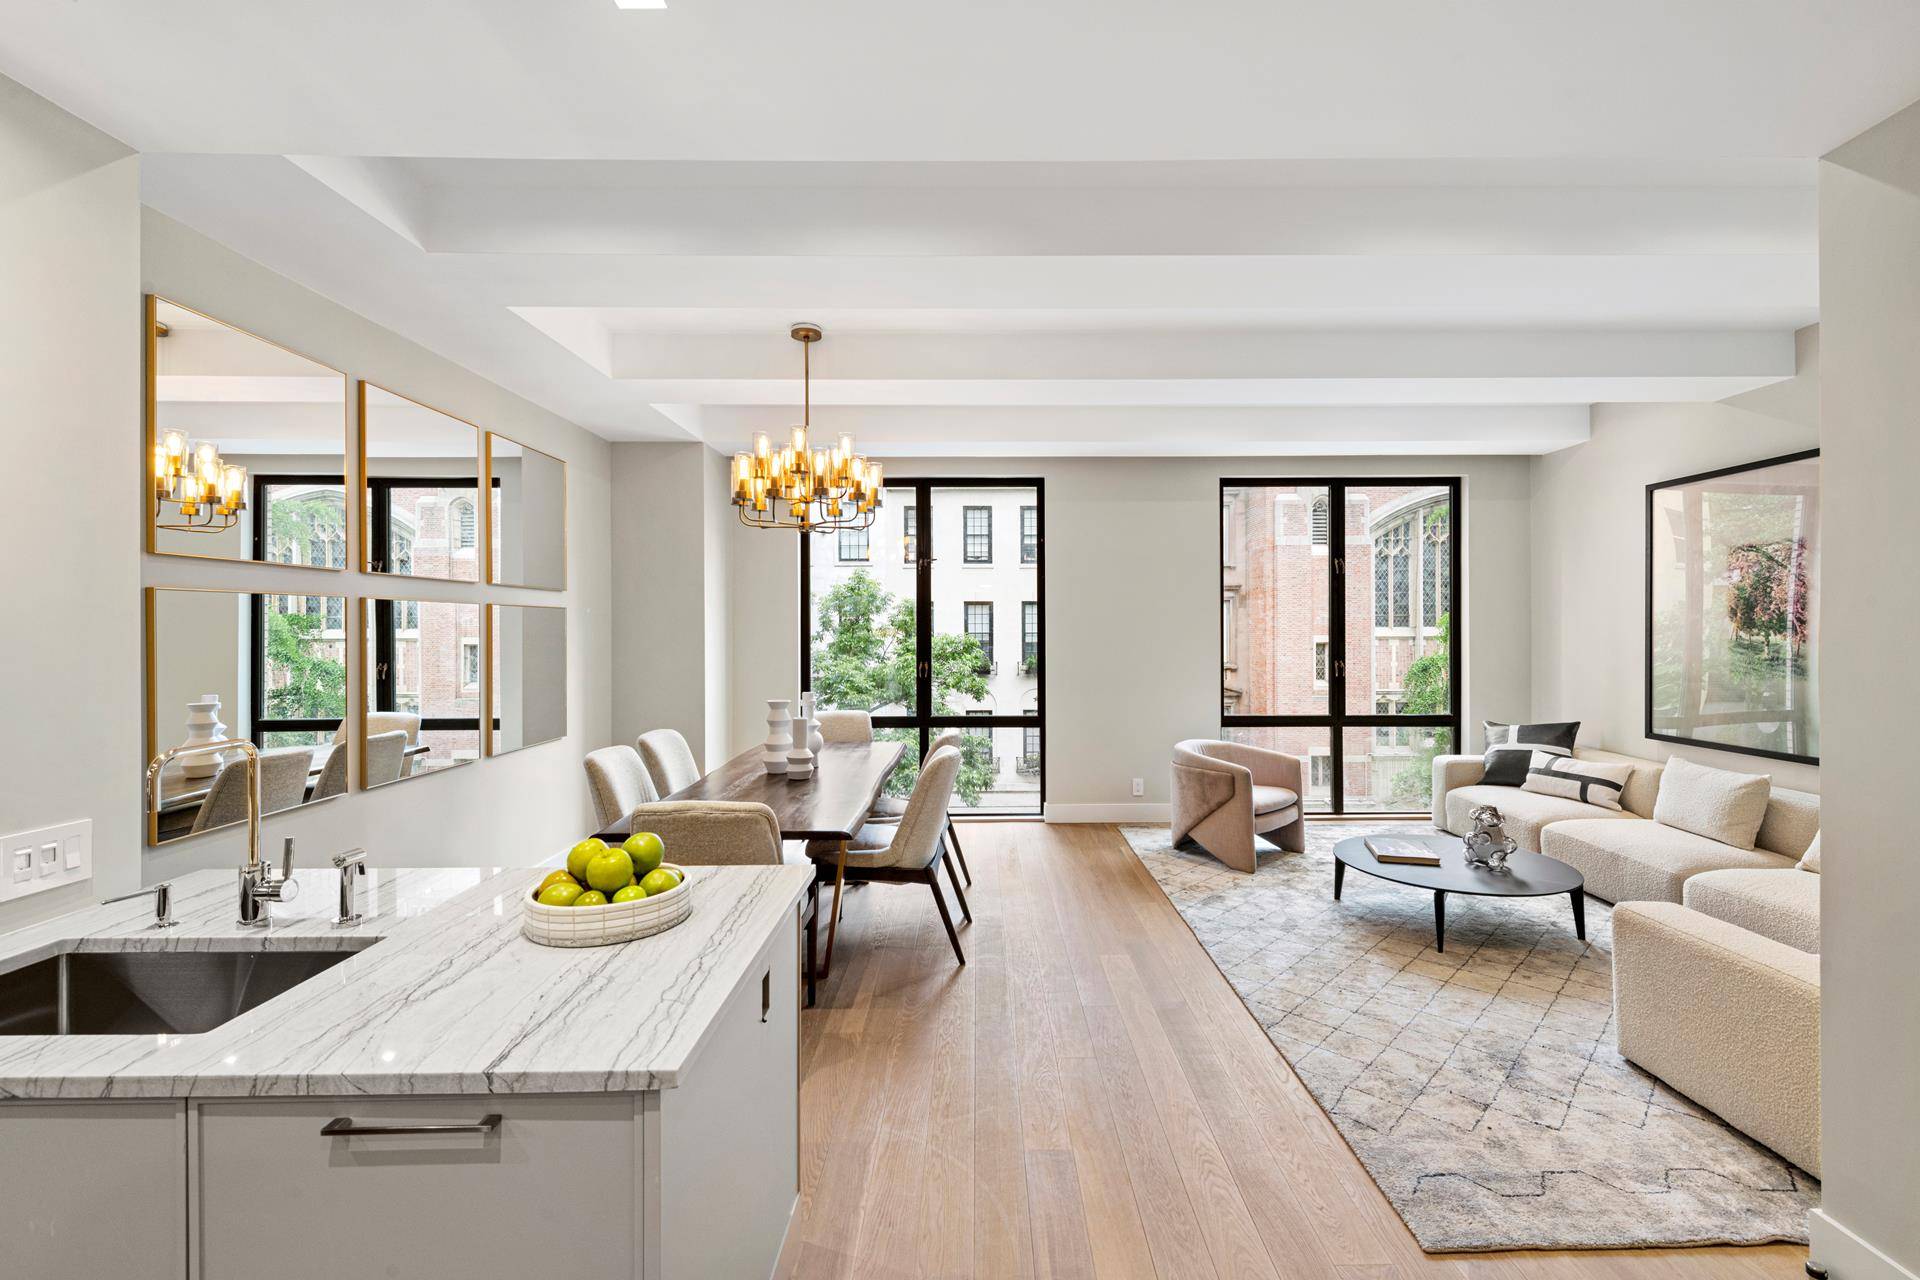 Introducing 163 East 62nd Street, the newest luxury condominium development on The Upper East Side.